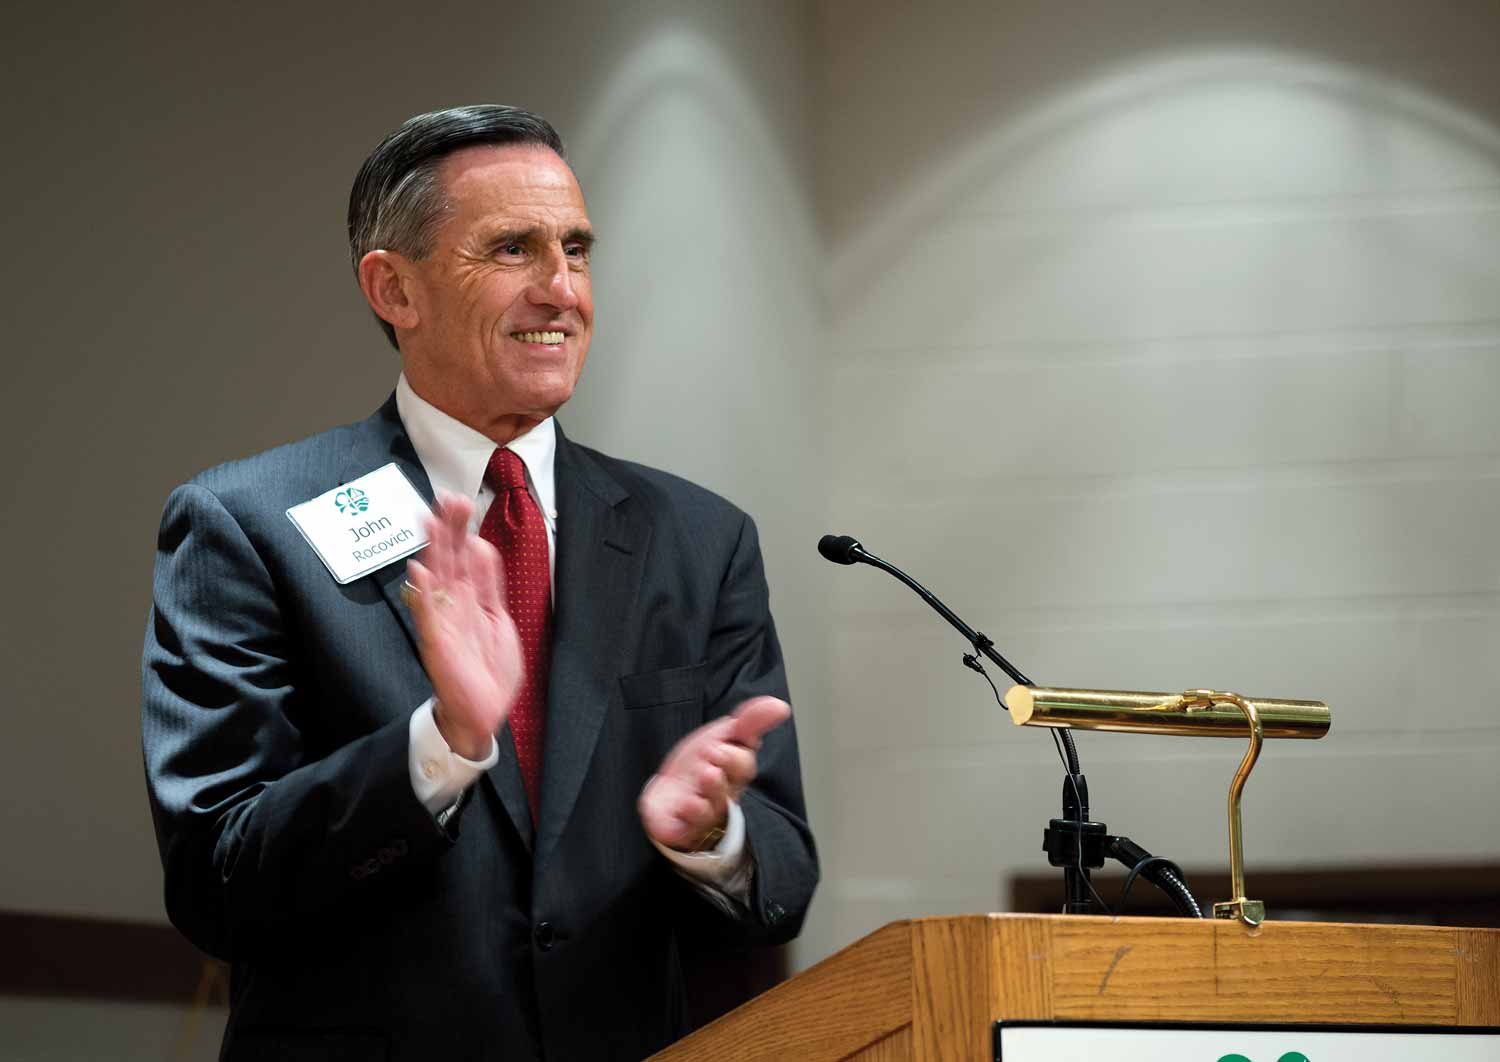 Portrait of John G. Rocovich, Jr., ‘66 Pamplin College of Business, clapping behind a lectern.